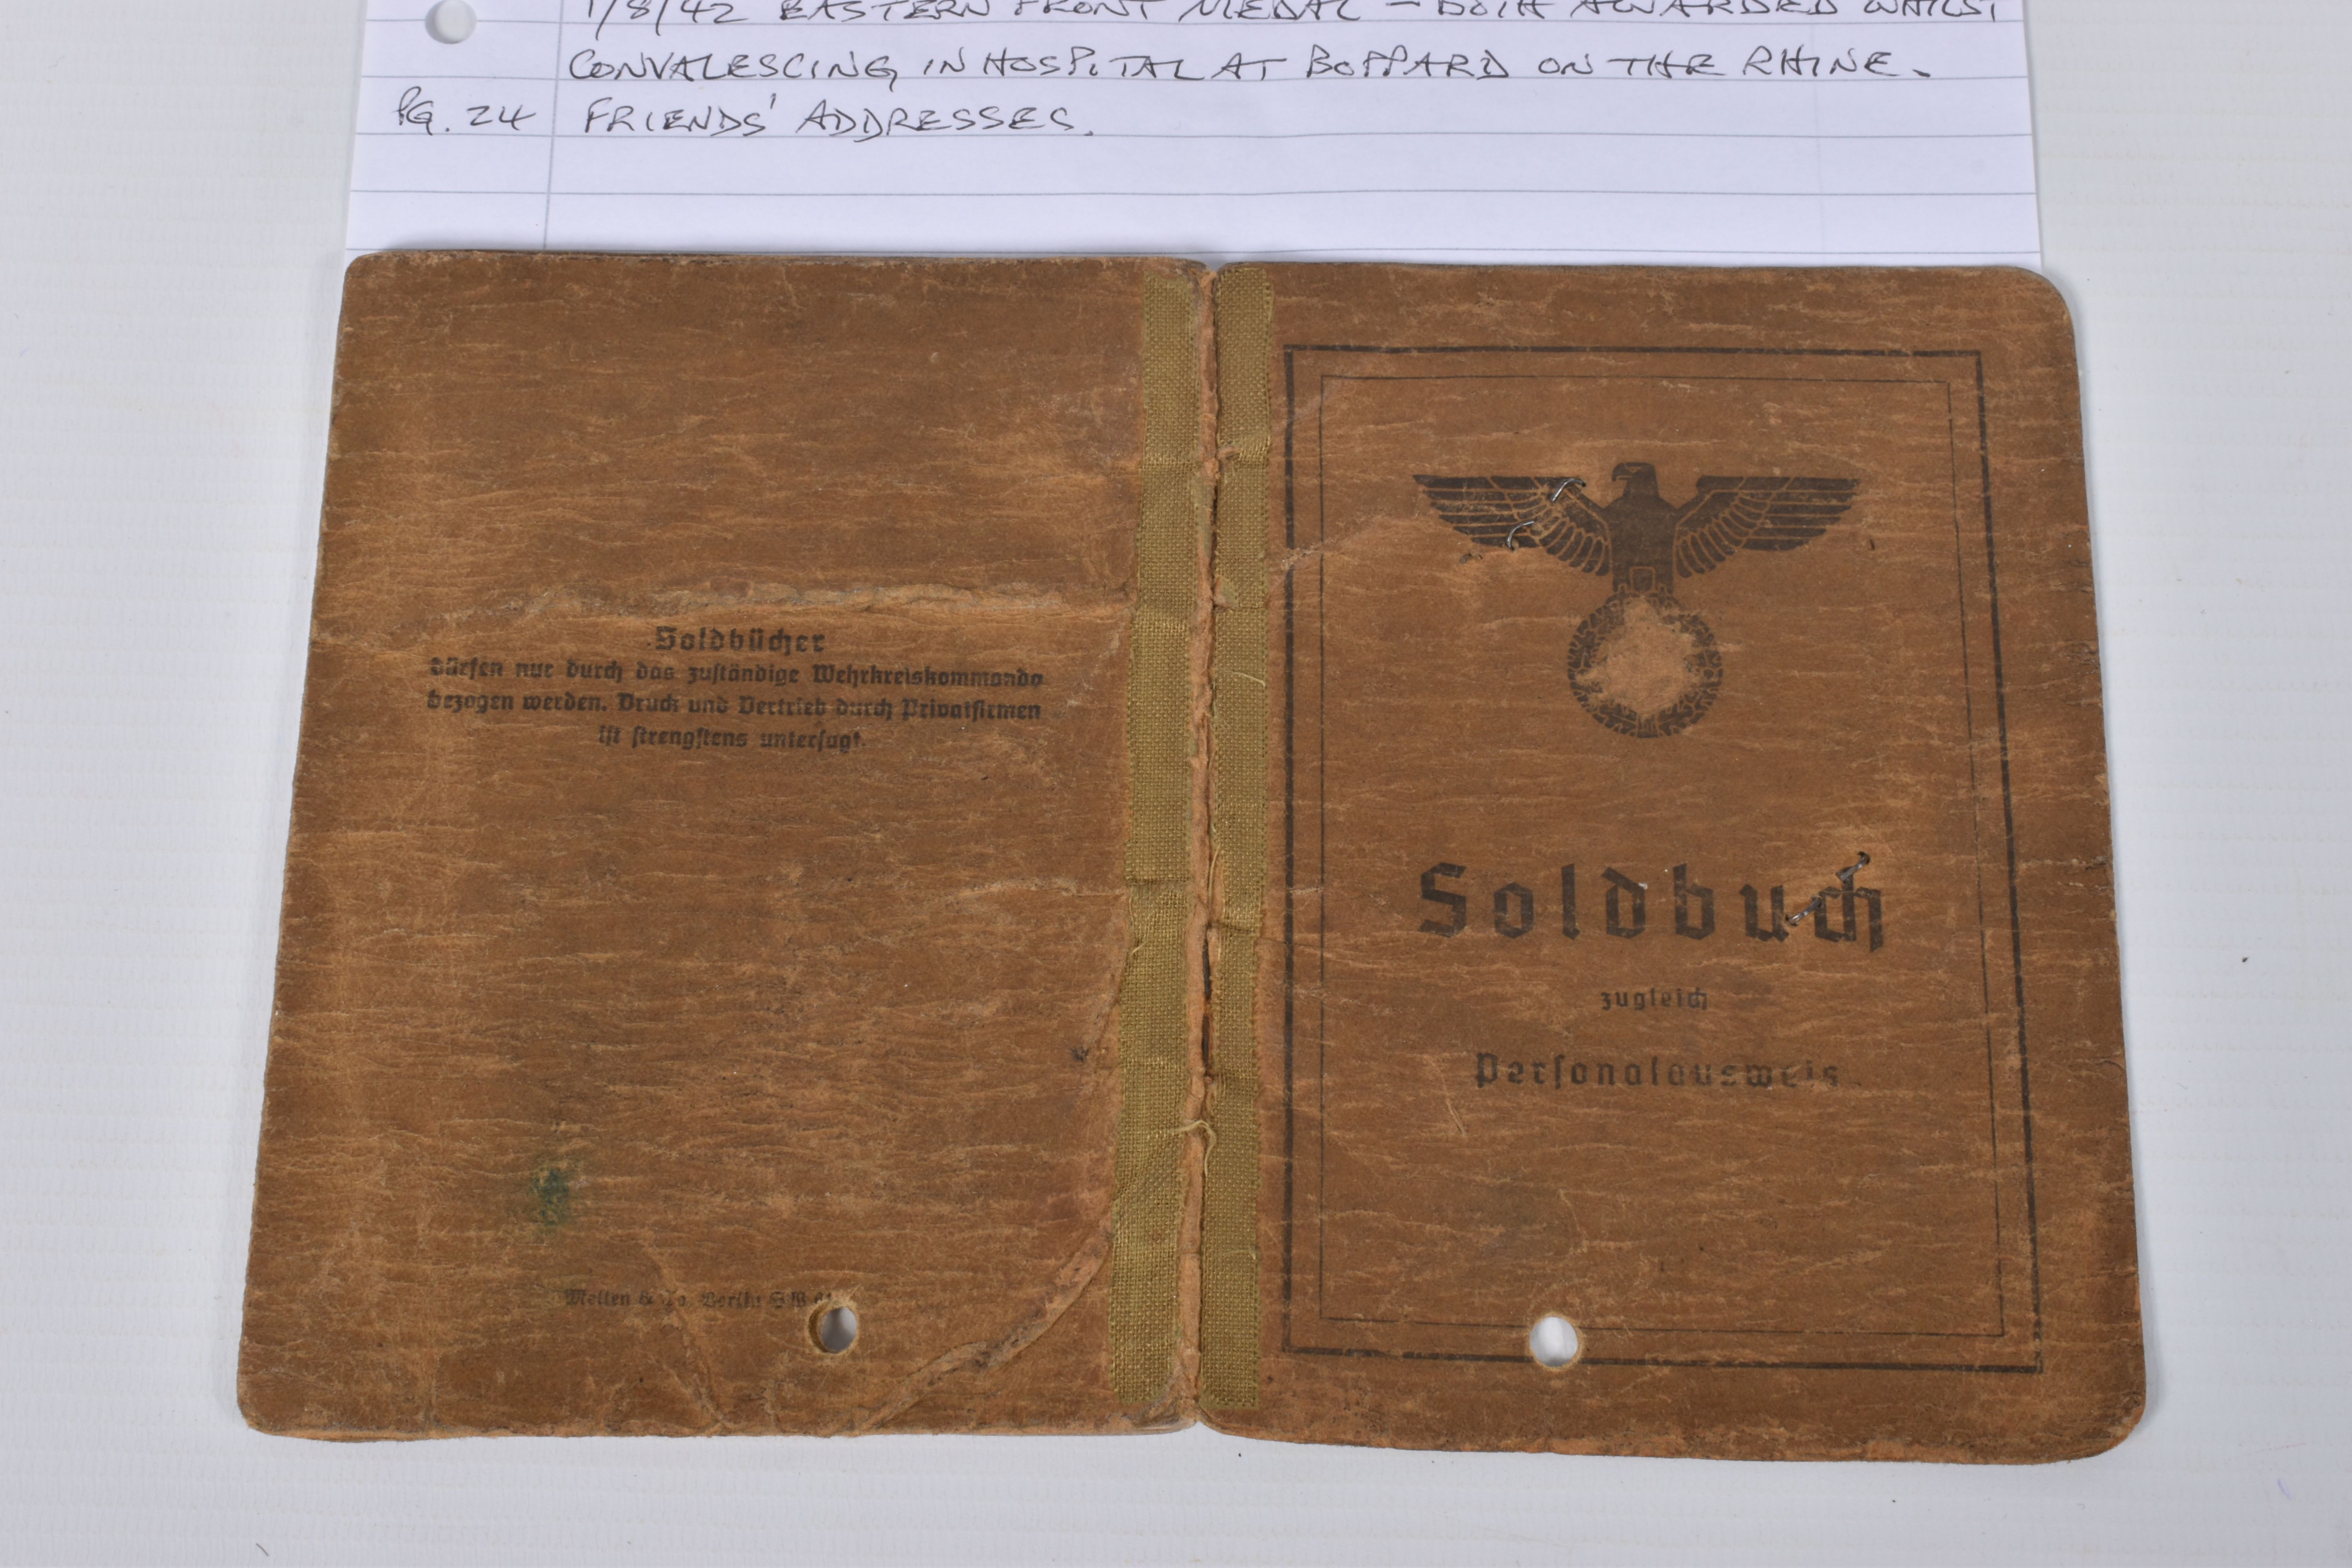 WWII SOLDBUCH USED AS POST-WAR ID DOCUMENT FOR REINHARD TILL, DOB 03/11/1916, place: Vienna, - Image 3 of 4